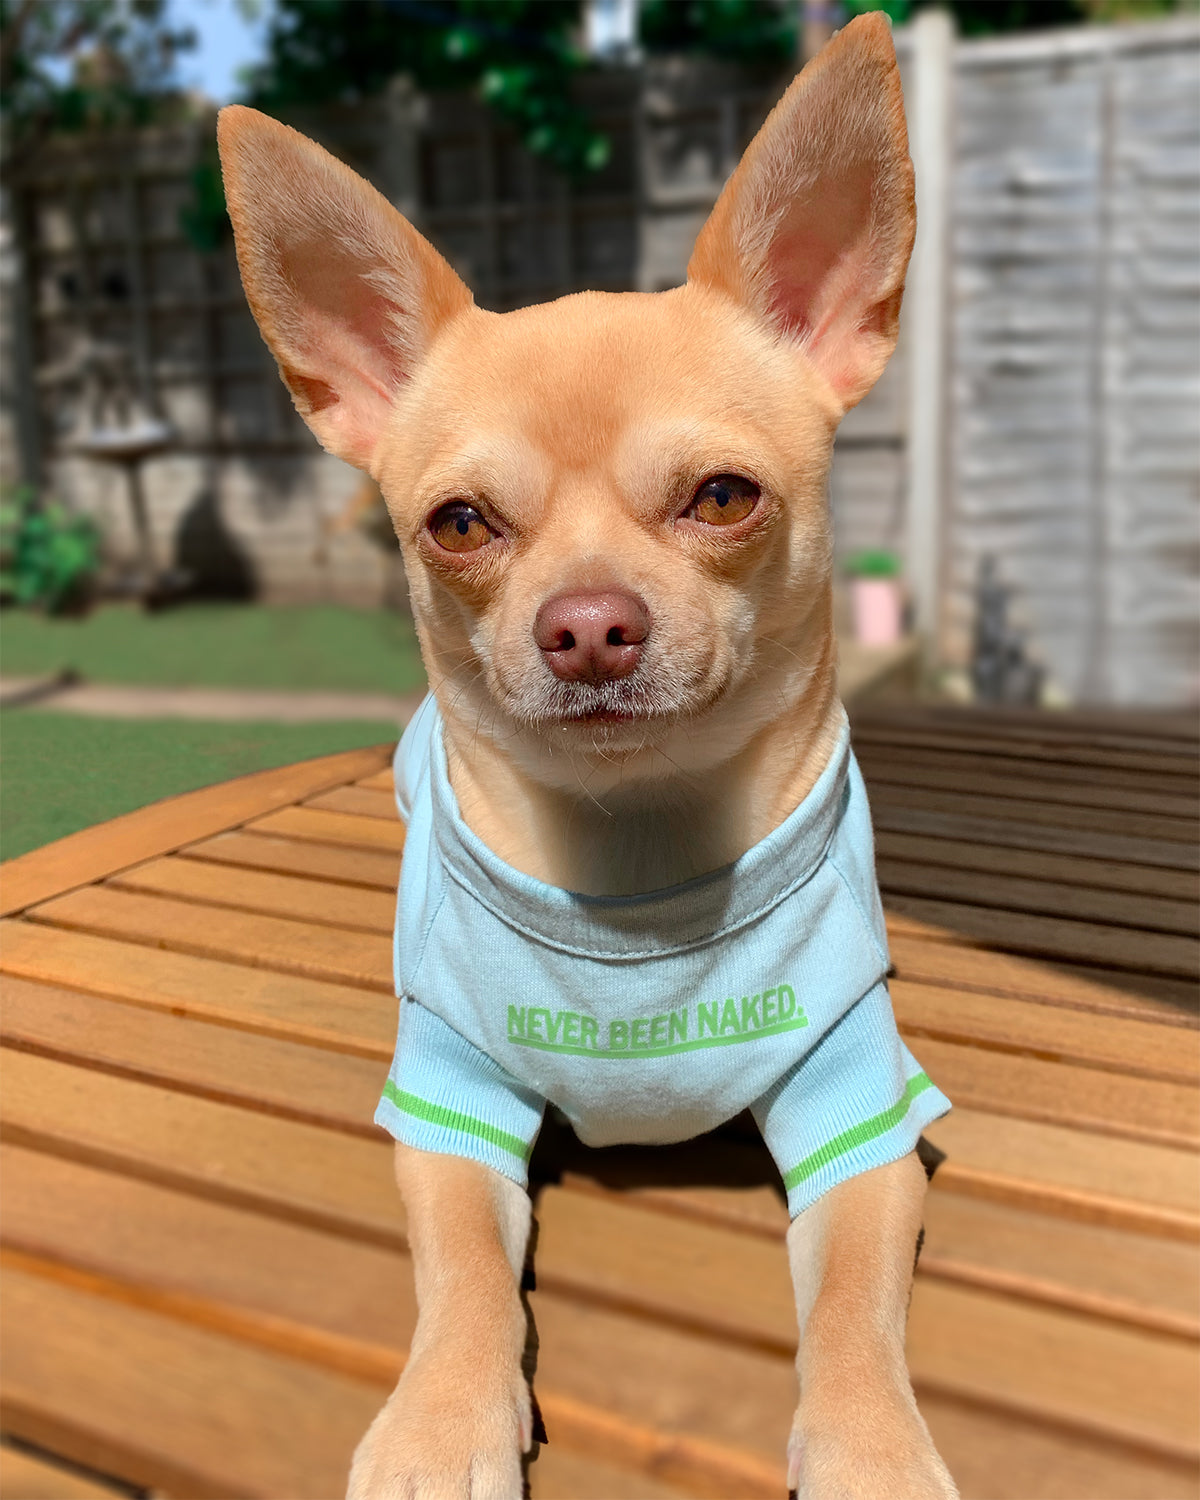 A dog on a table wearing an Over Glam t-shirt